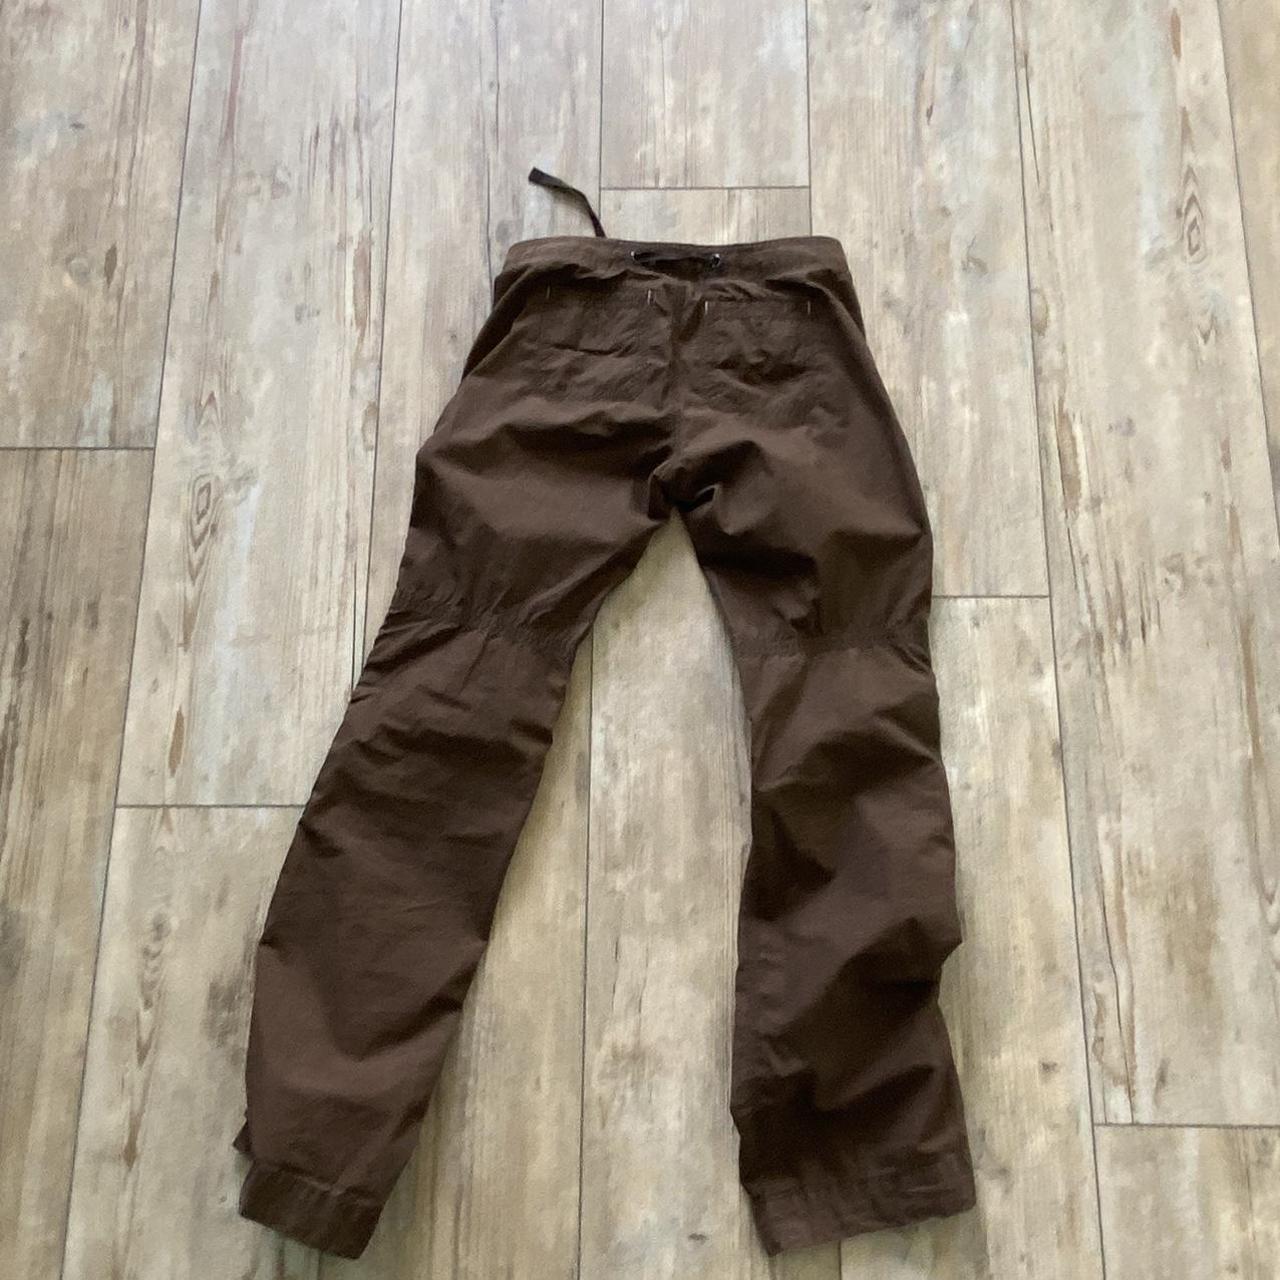 gap low waisted brown cargo pants size 0. for... - Depop